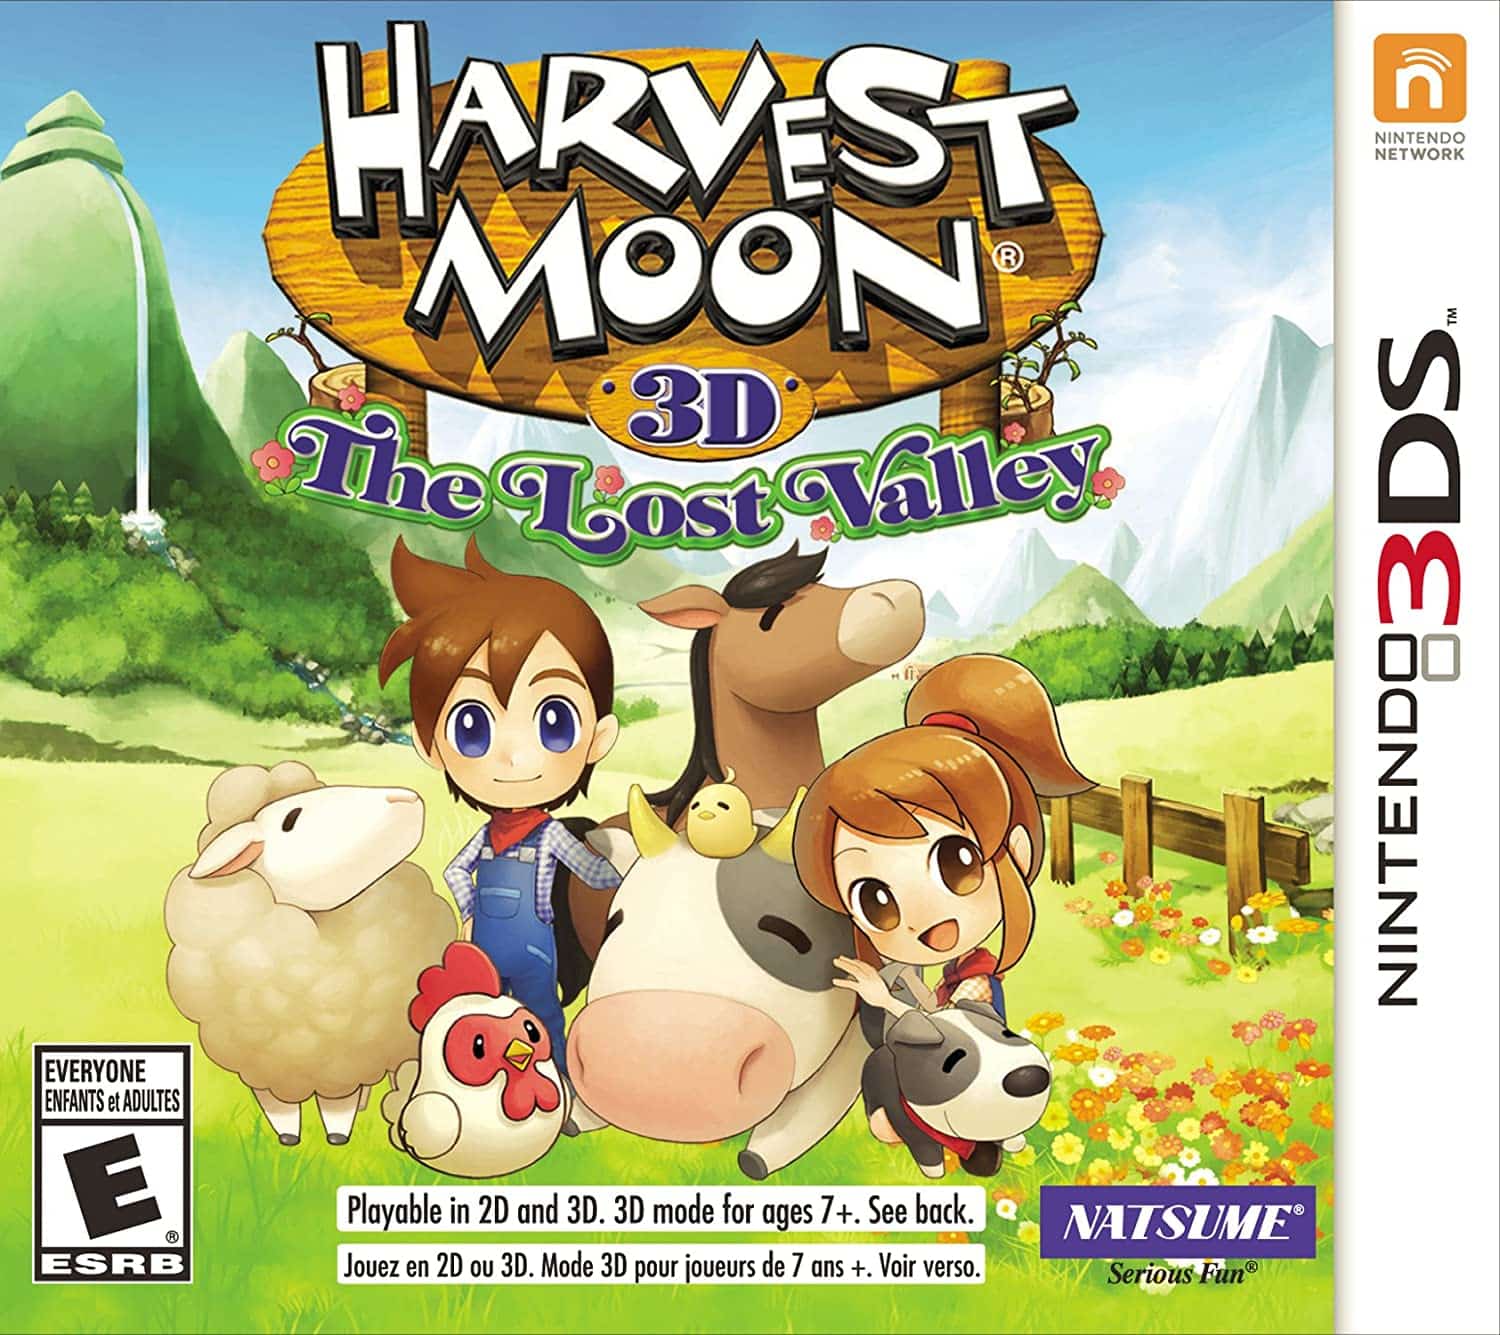 Harvest Moon: The Lost Valley player count stats